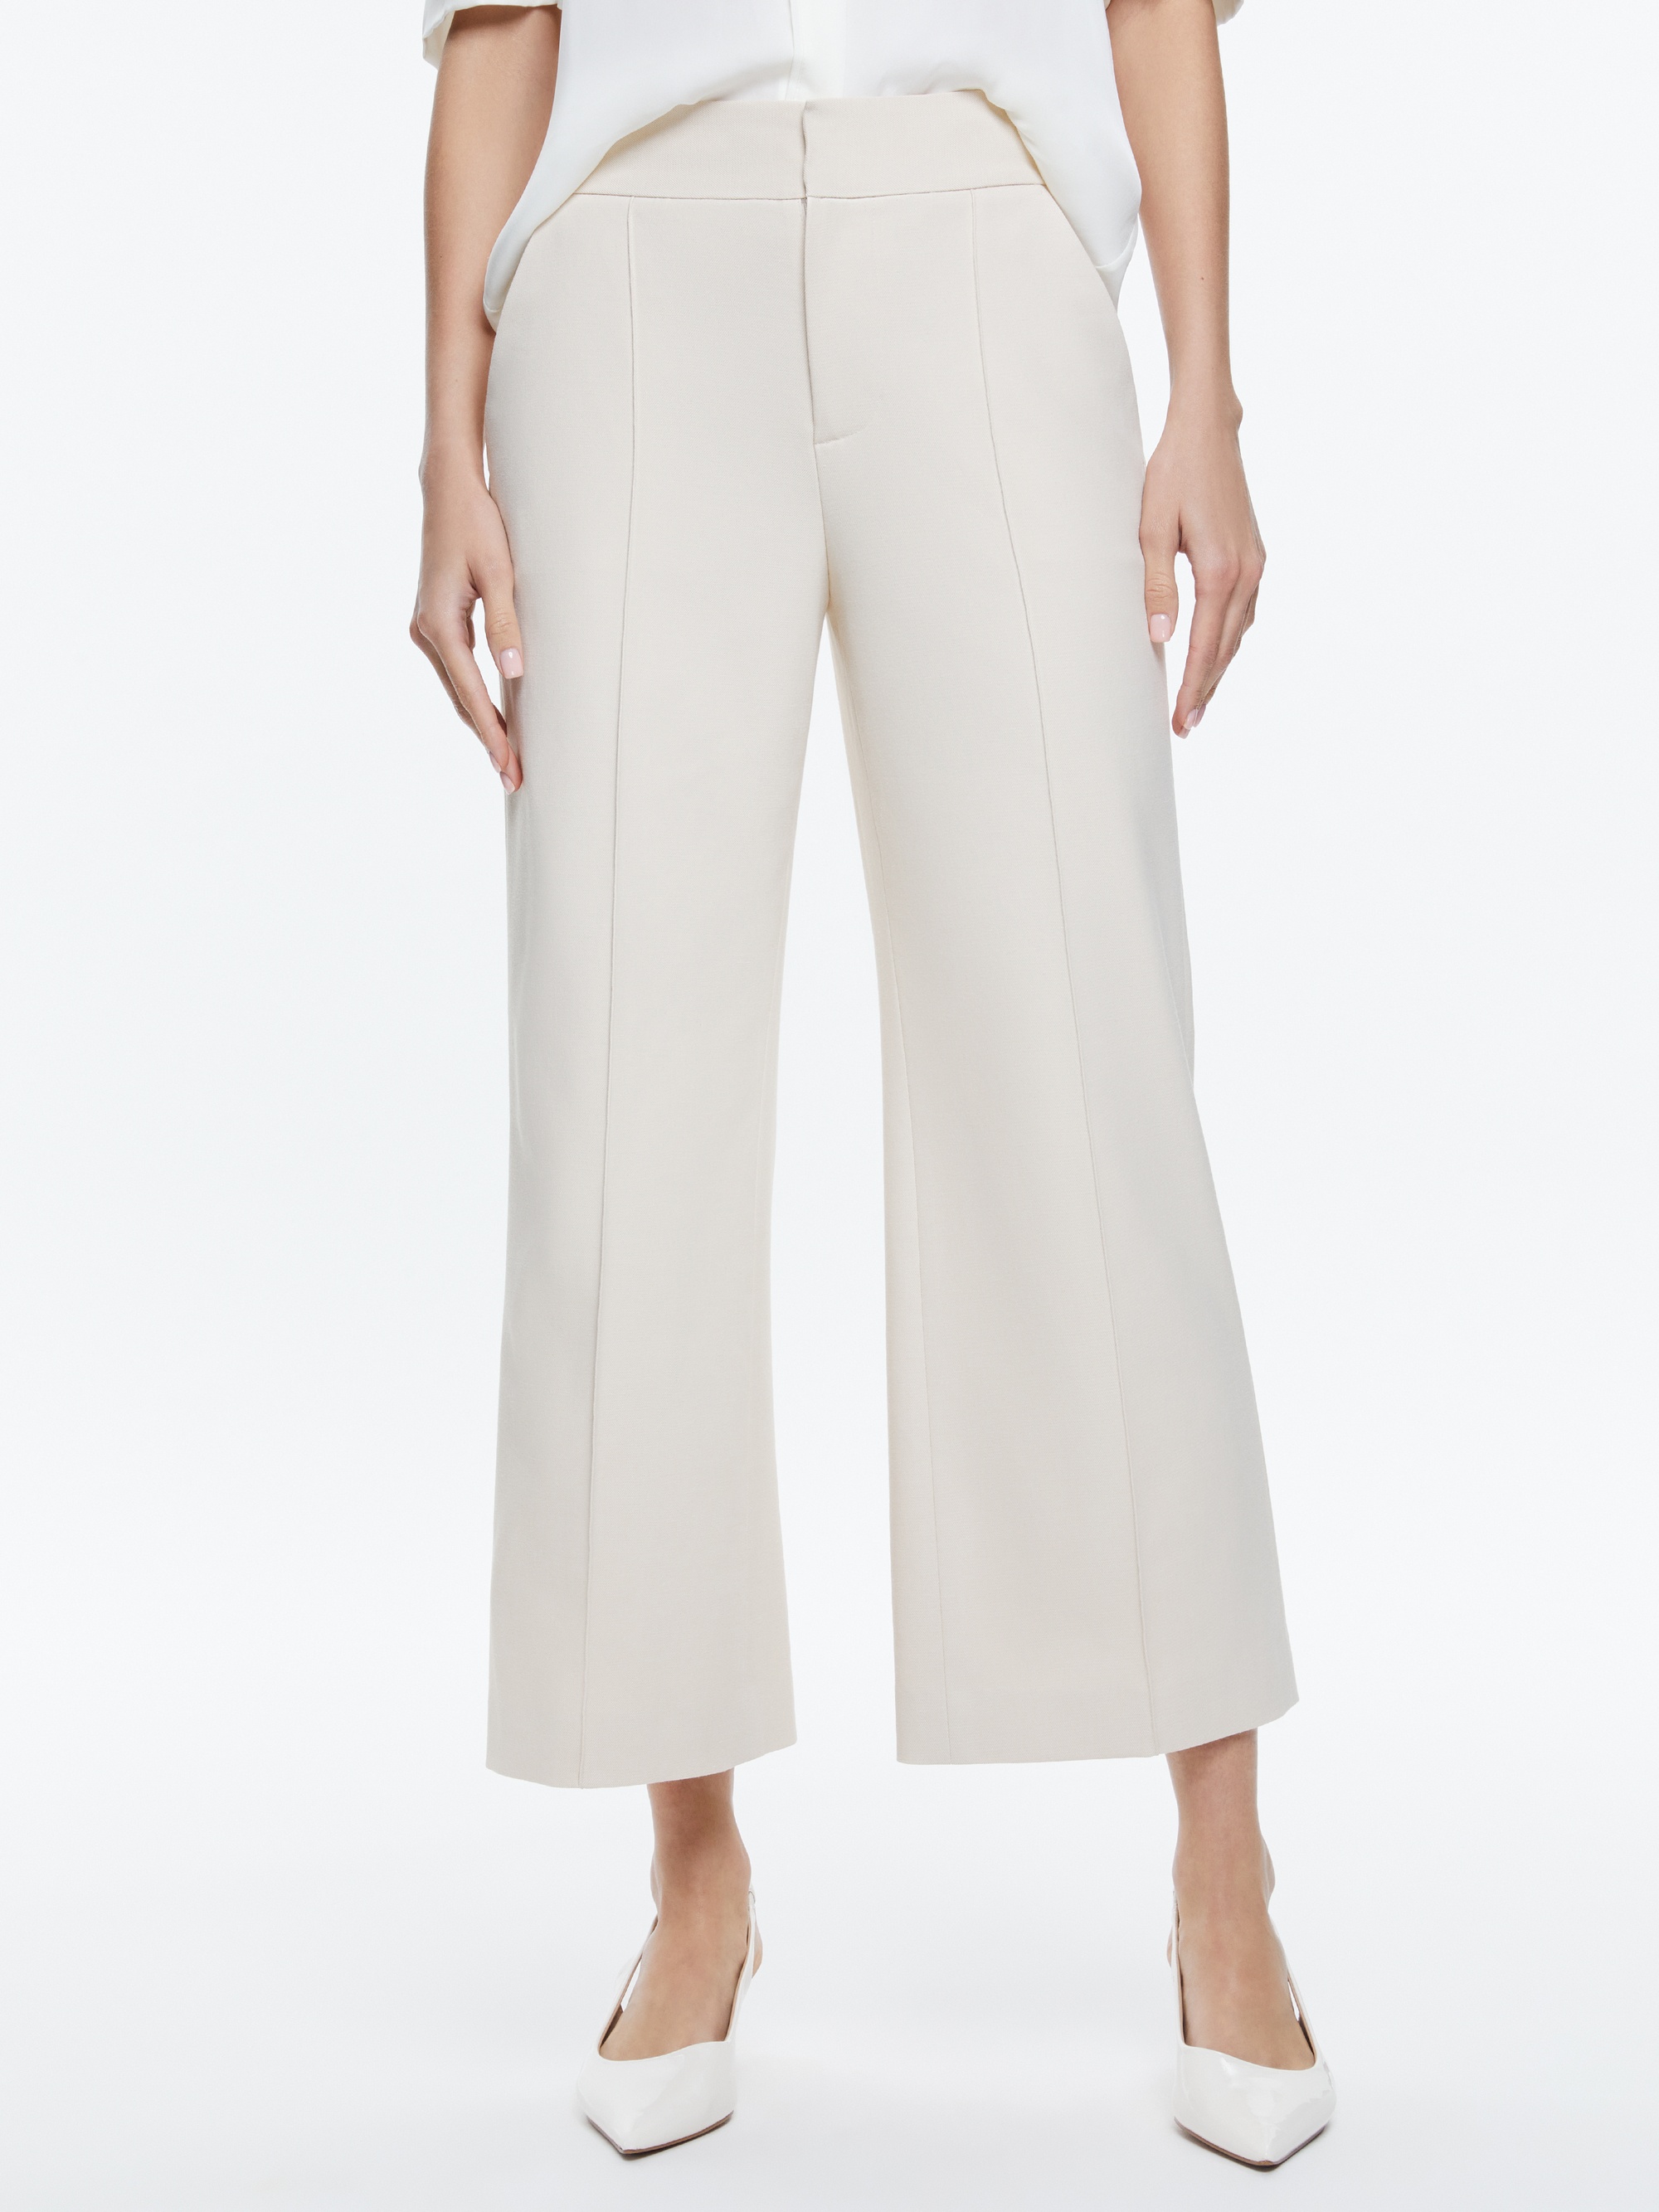 DYLAN HIGH RISE CROPPED PANT - 2